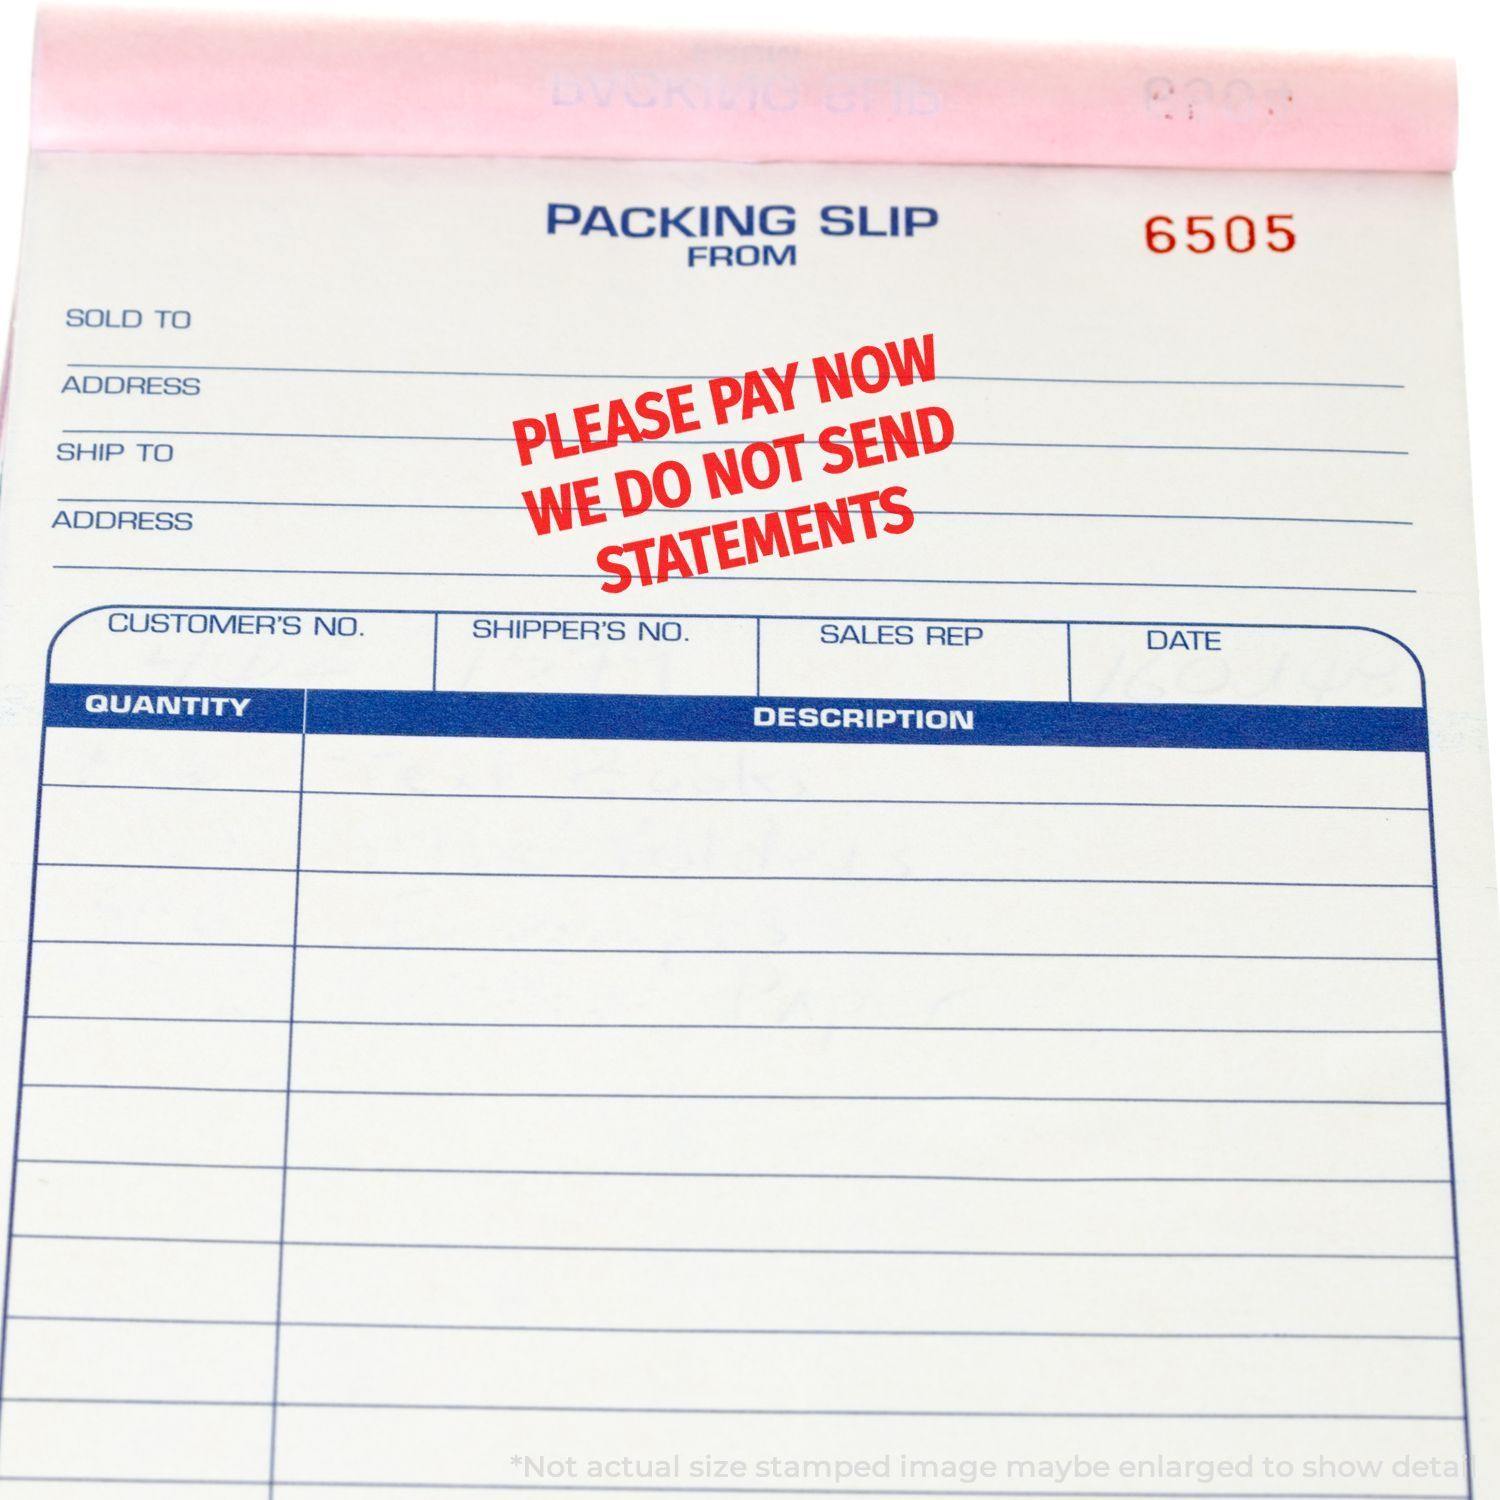 A stock office rubber stamp with a stamped image showing how the texts "PLEASE PAY NOW" and "WE DO NOT SEND STATEMENTS" are displayed after stamping.